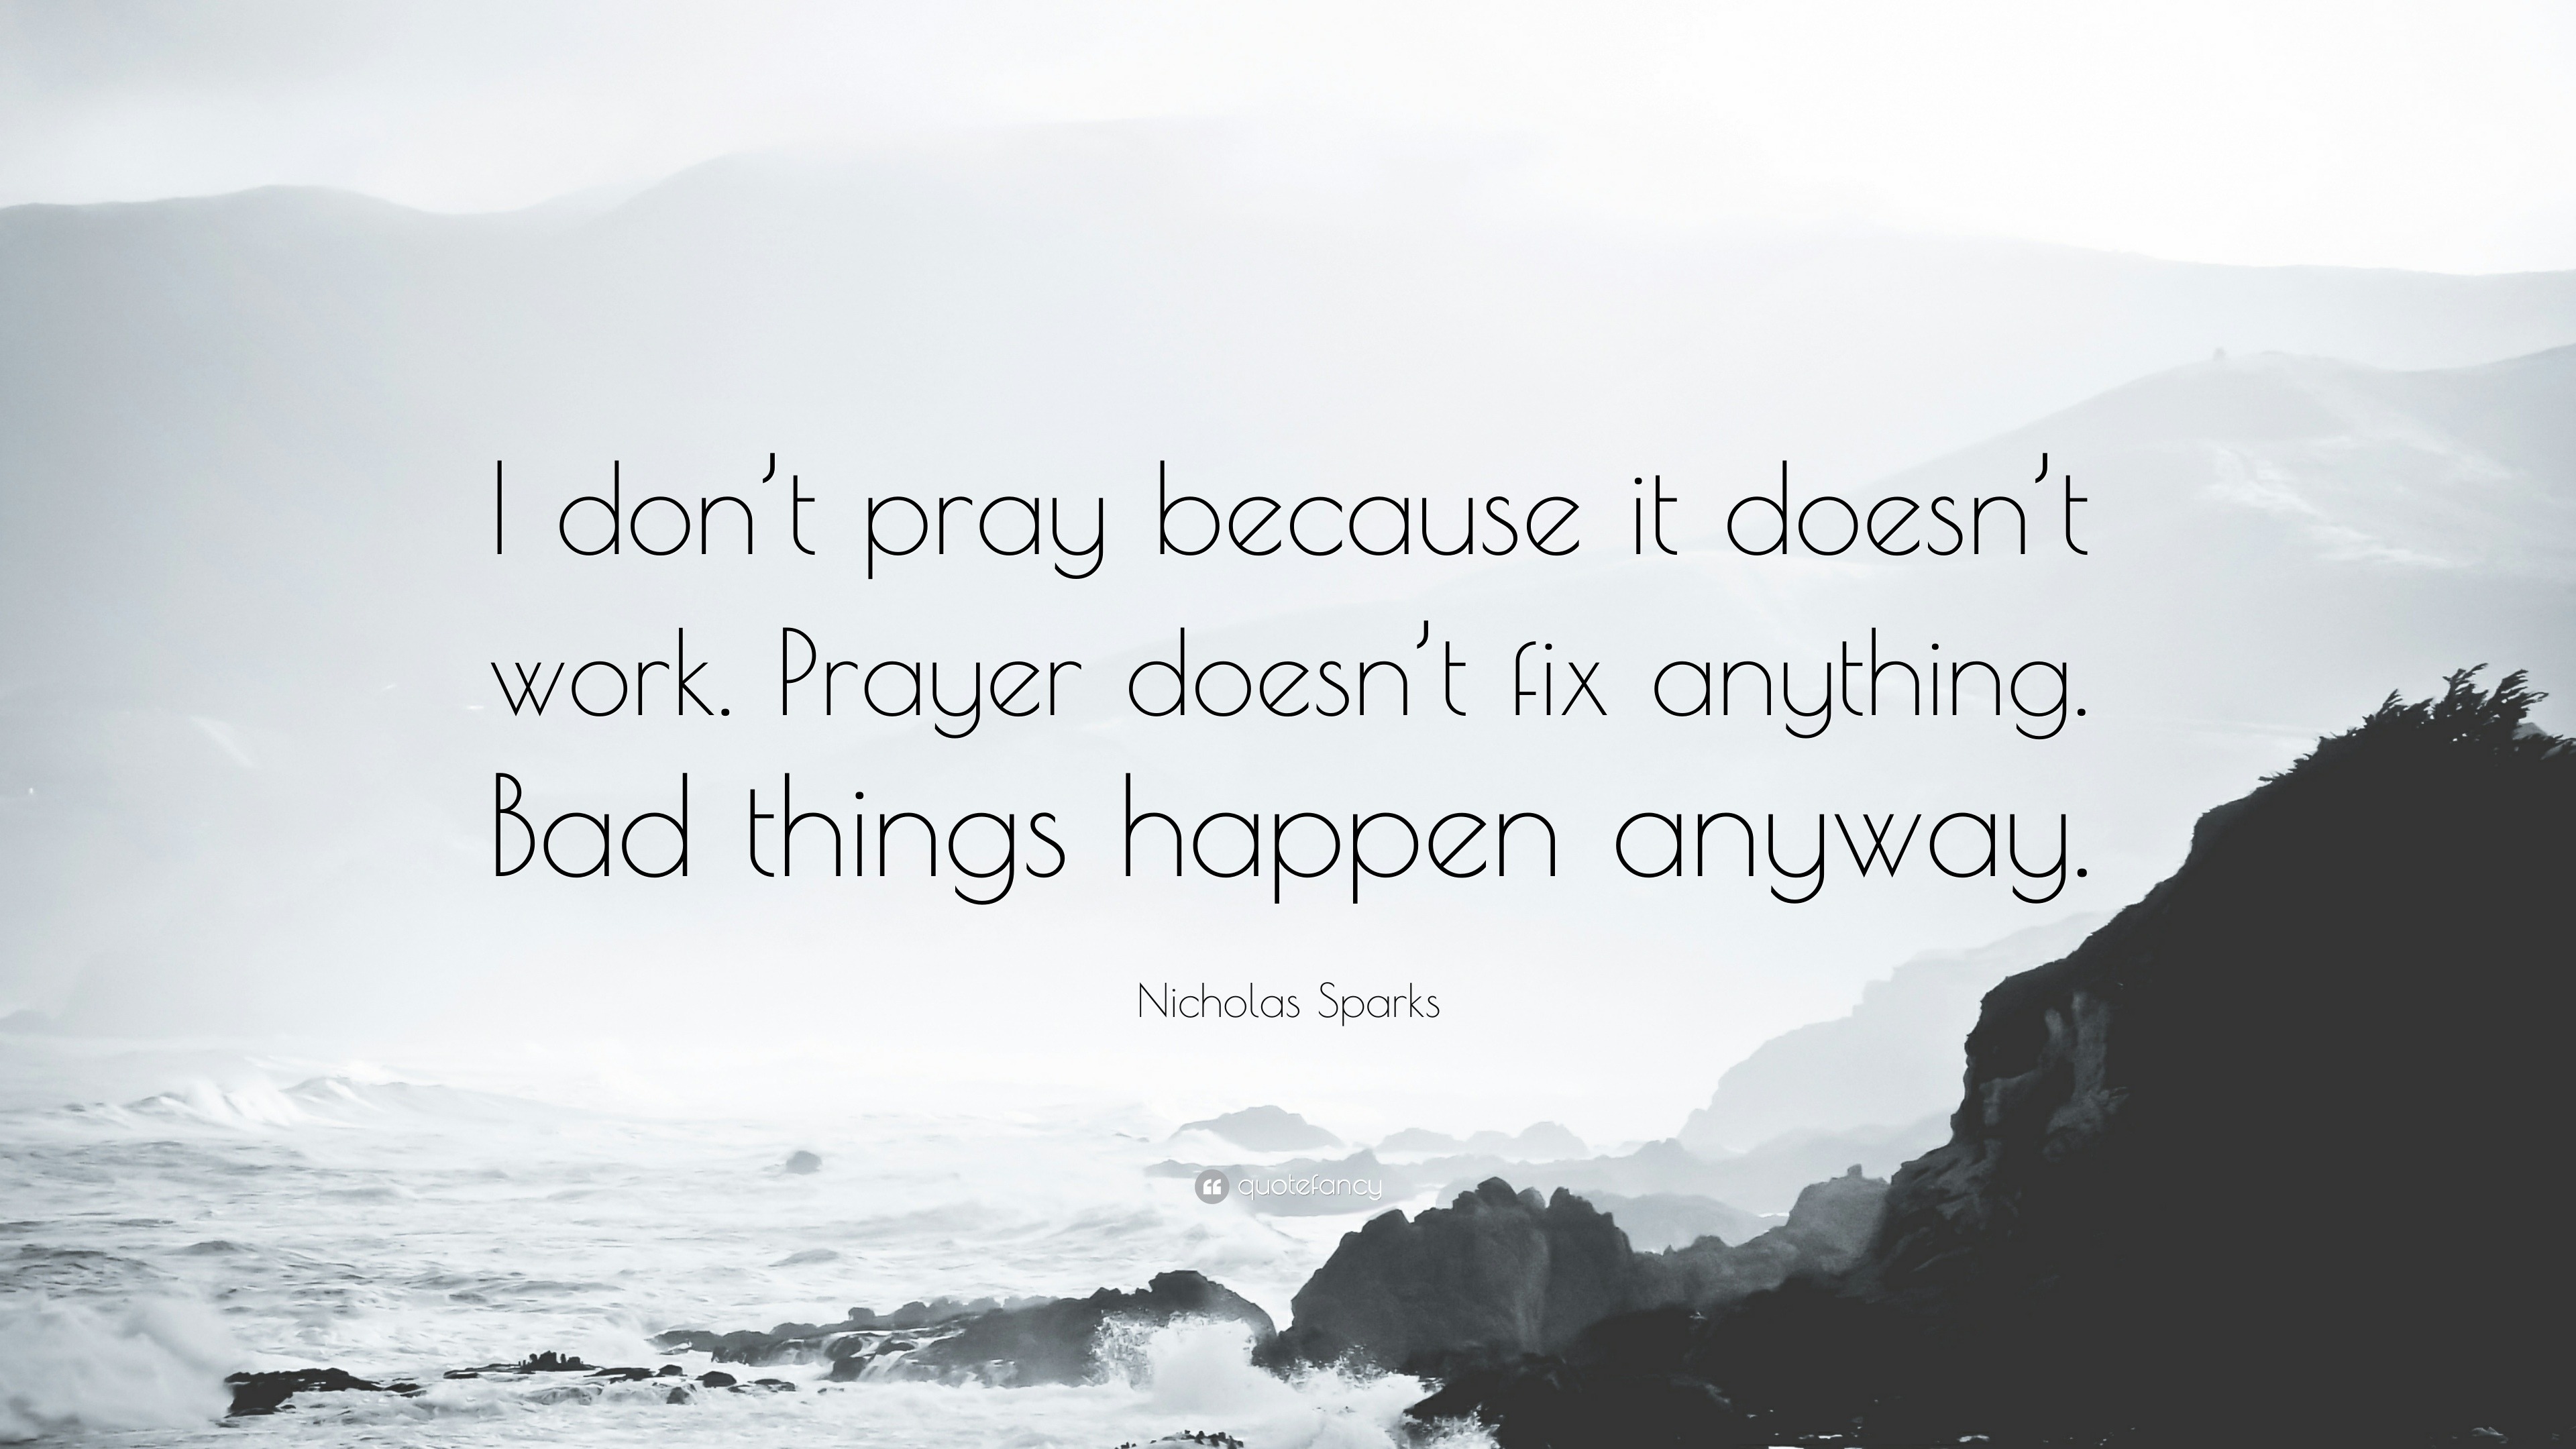 Nicholas Sparks Quote: “I Don't Pray Because It Doesn't Work. Prayer Doesn't Fix